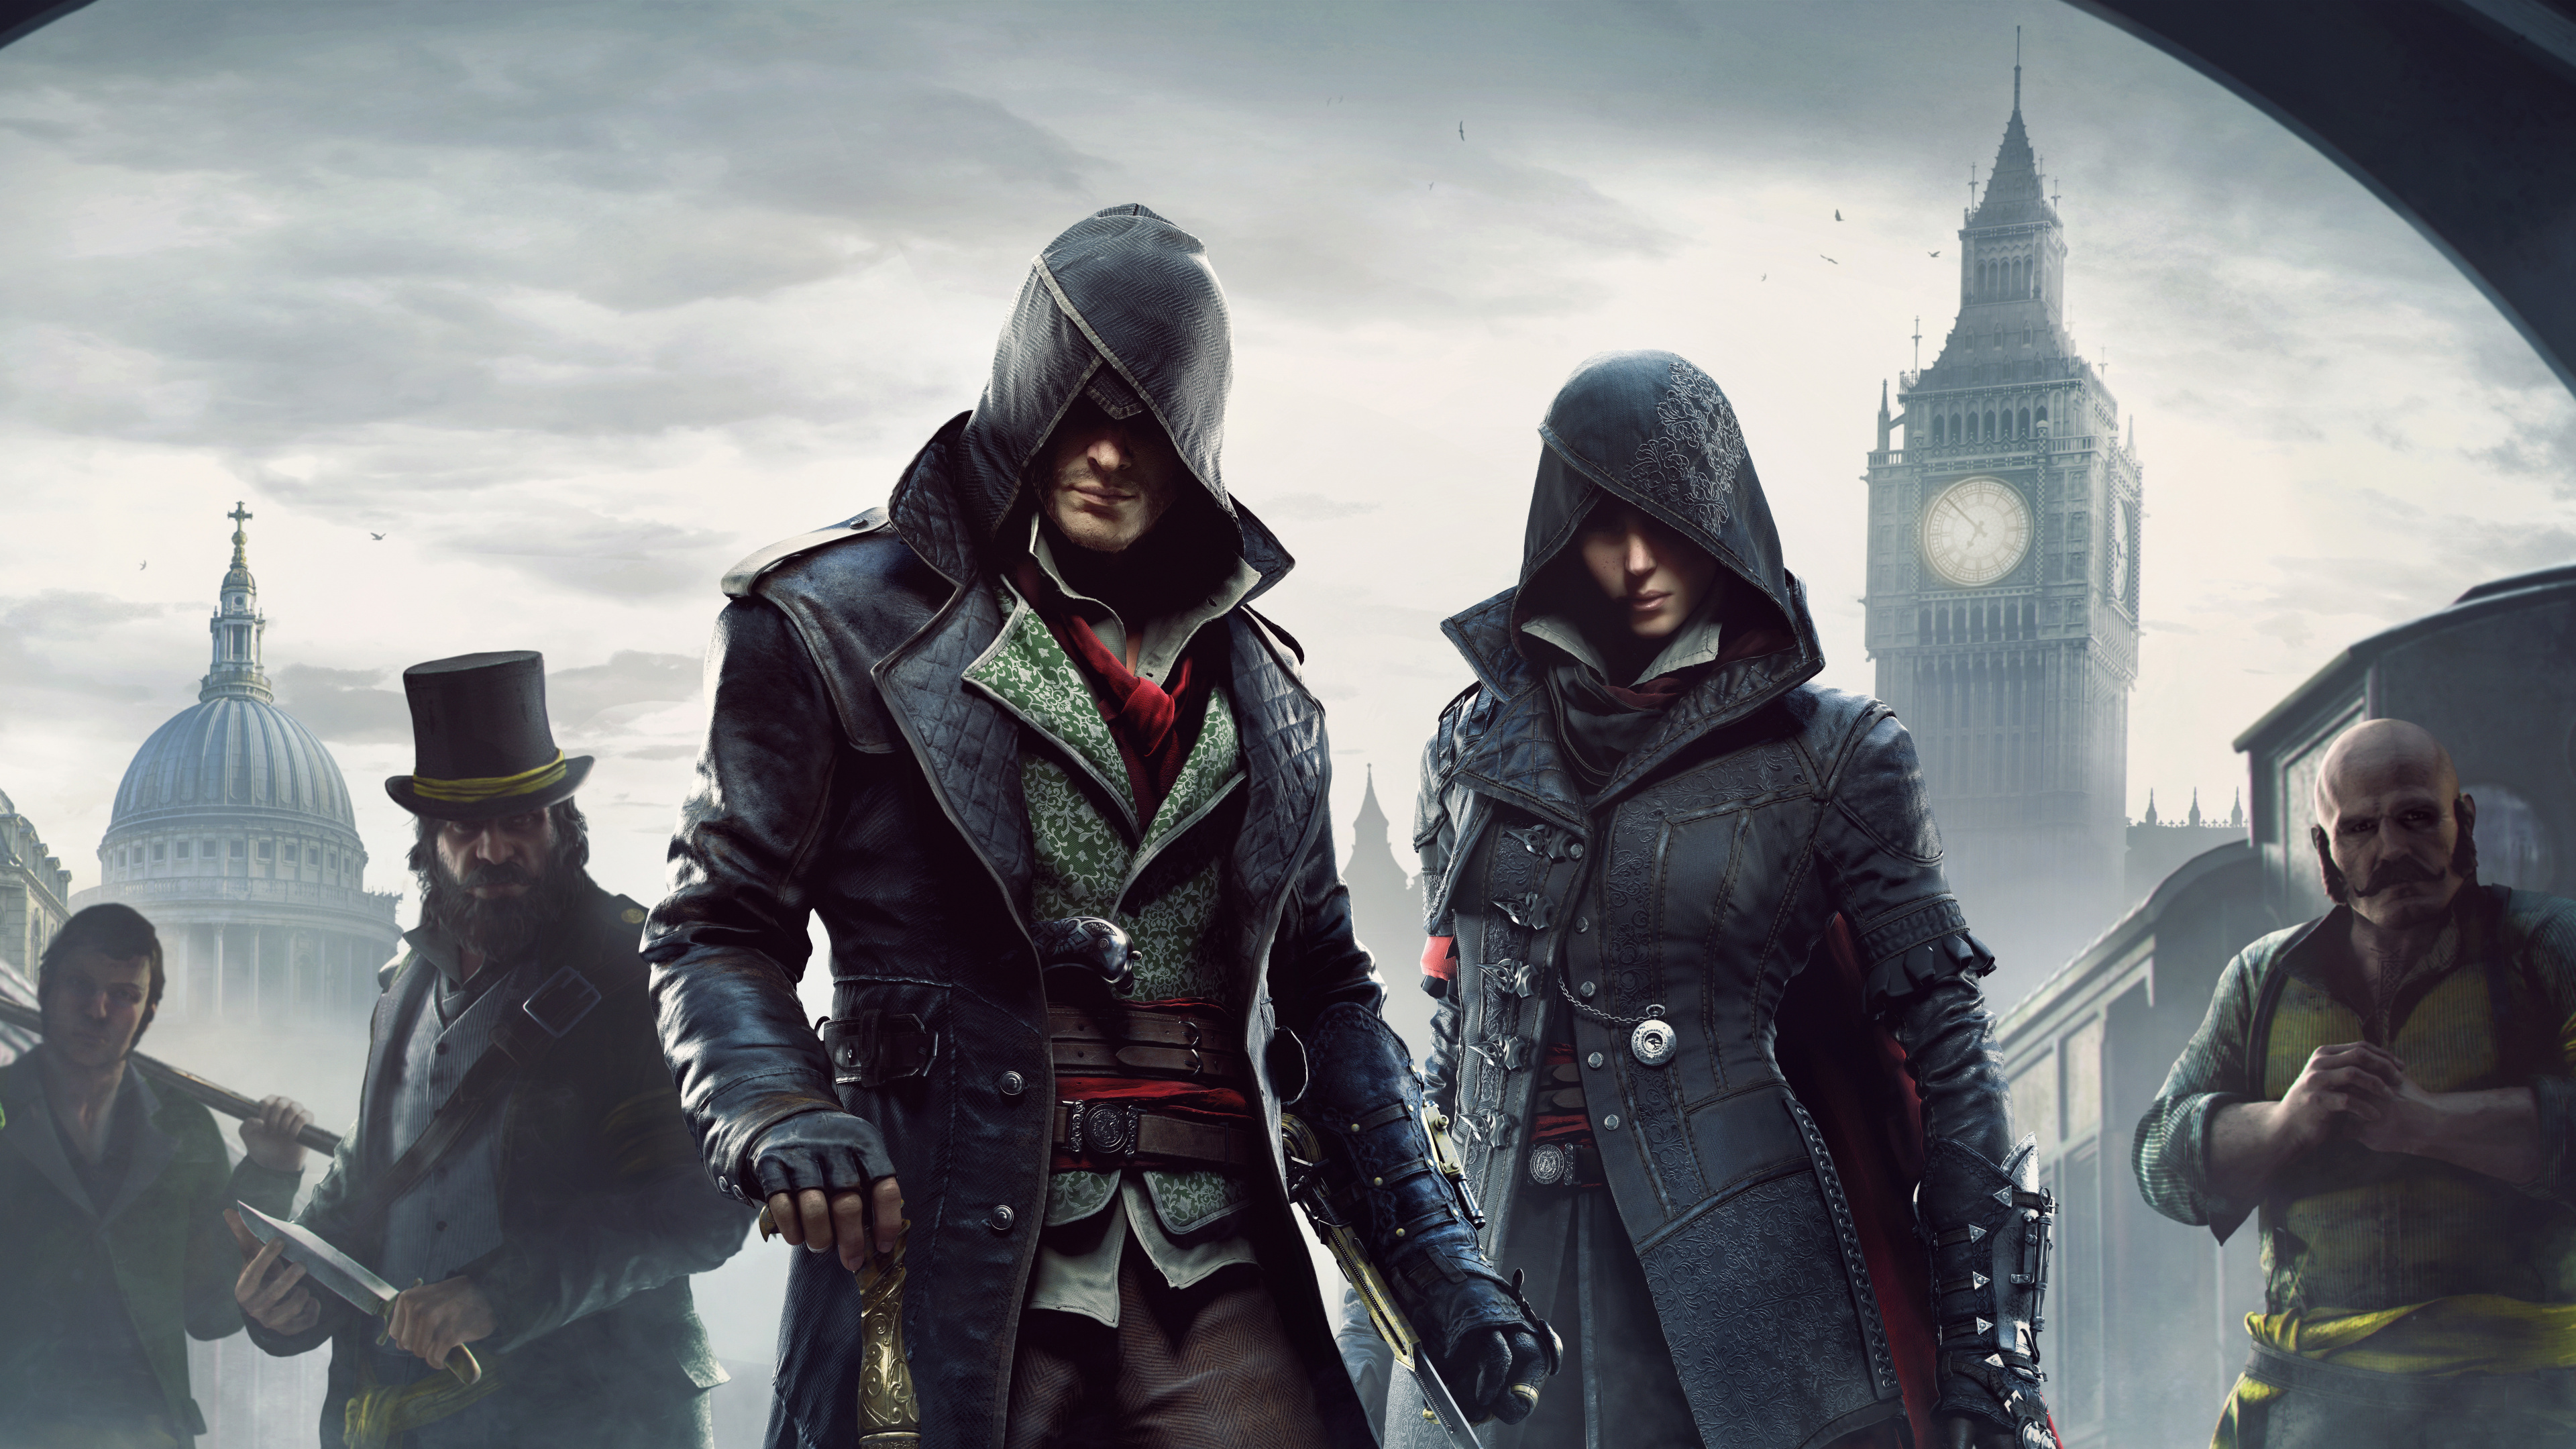 Assassins Creed Syndicate, Ubisoft, pc Game, Film, Assassins Creed Unity. Wallpaper in 3840x2160 Resolution